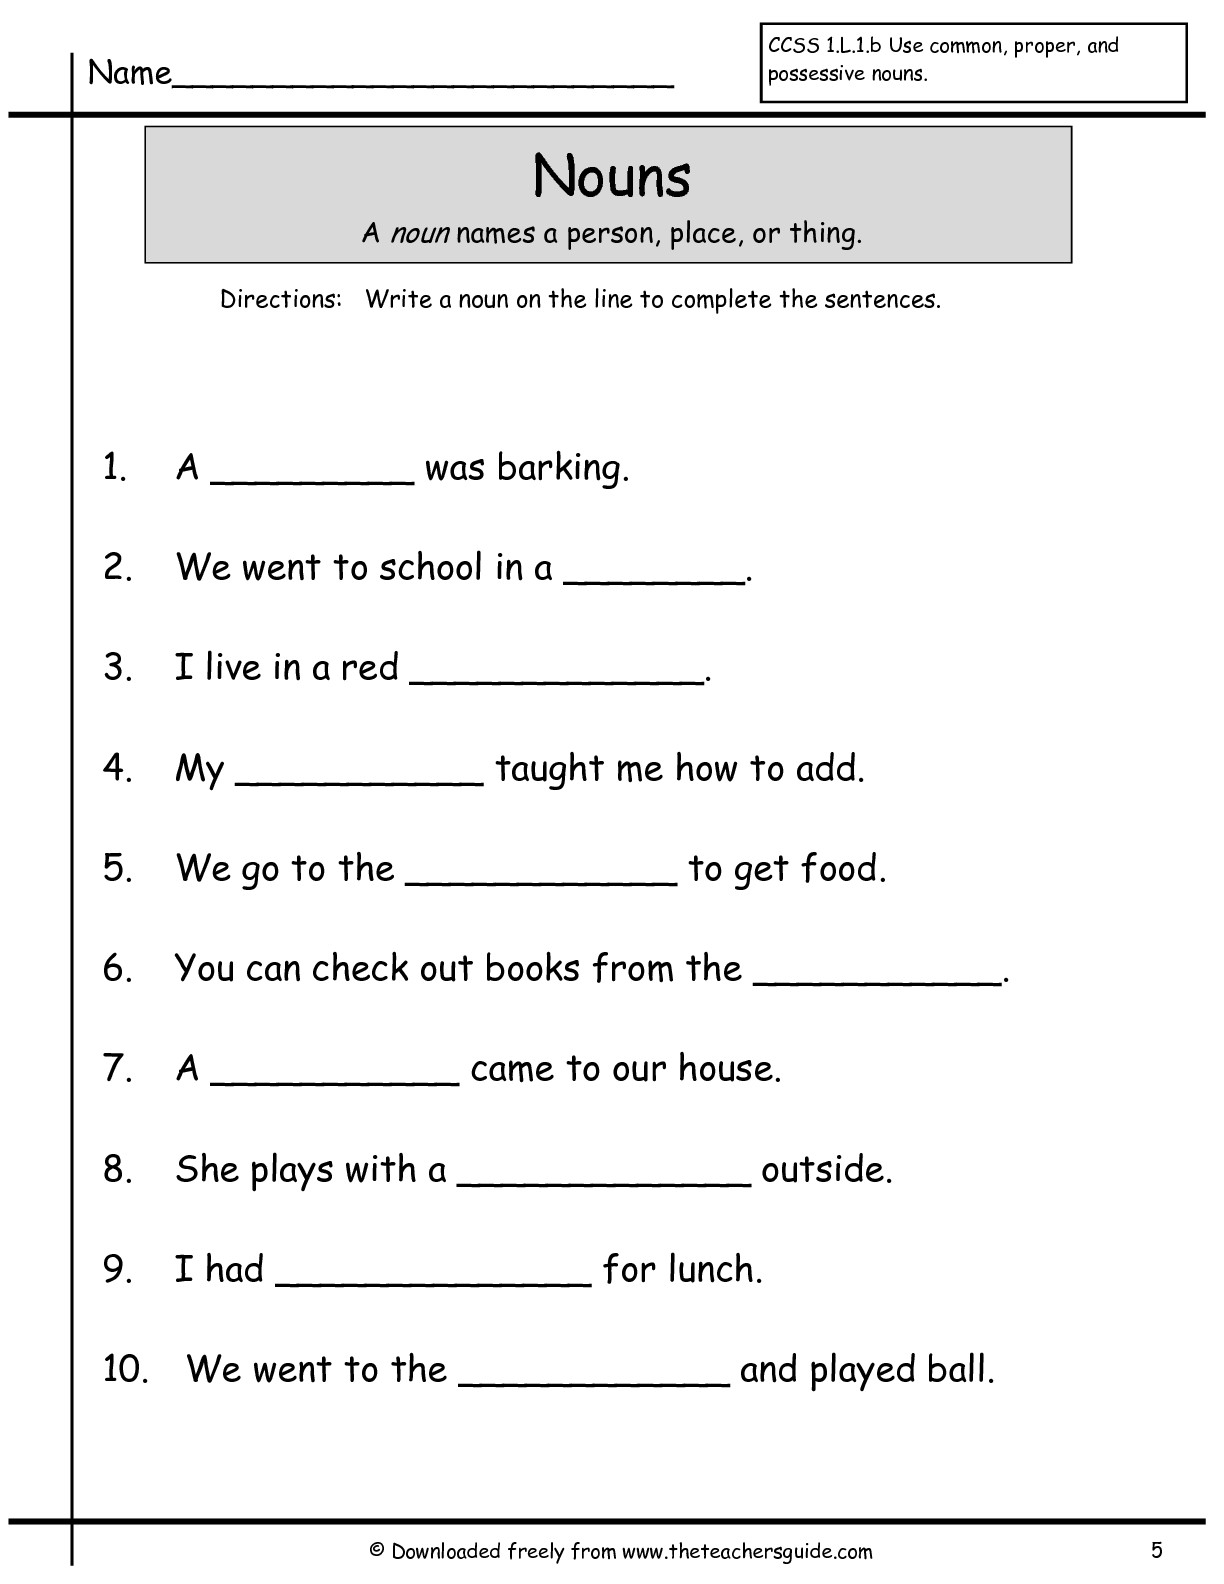 16-best-images-of-printable-spanish-worksheets-1st-grade-spanish-kindergarten-worksheets-1st